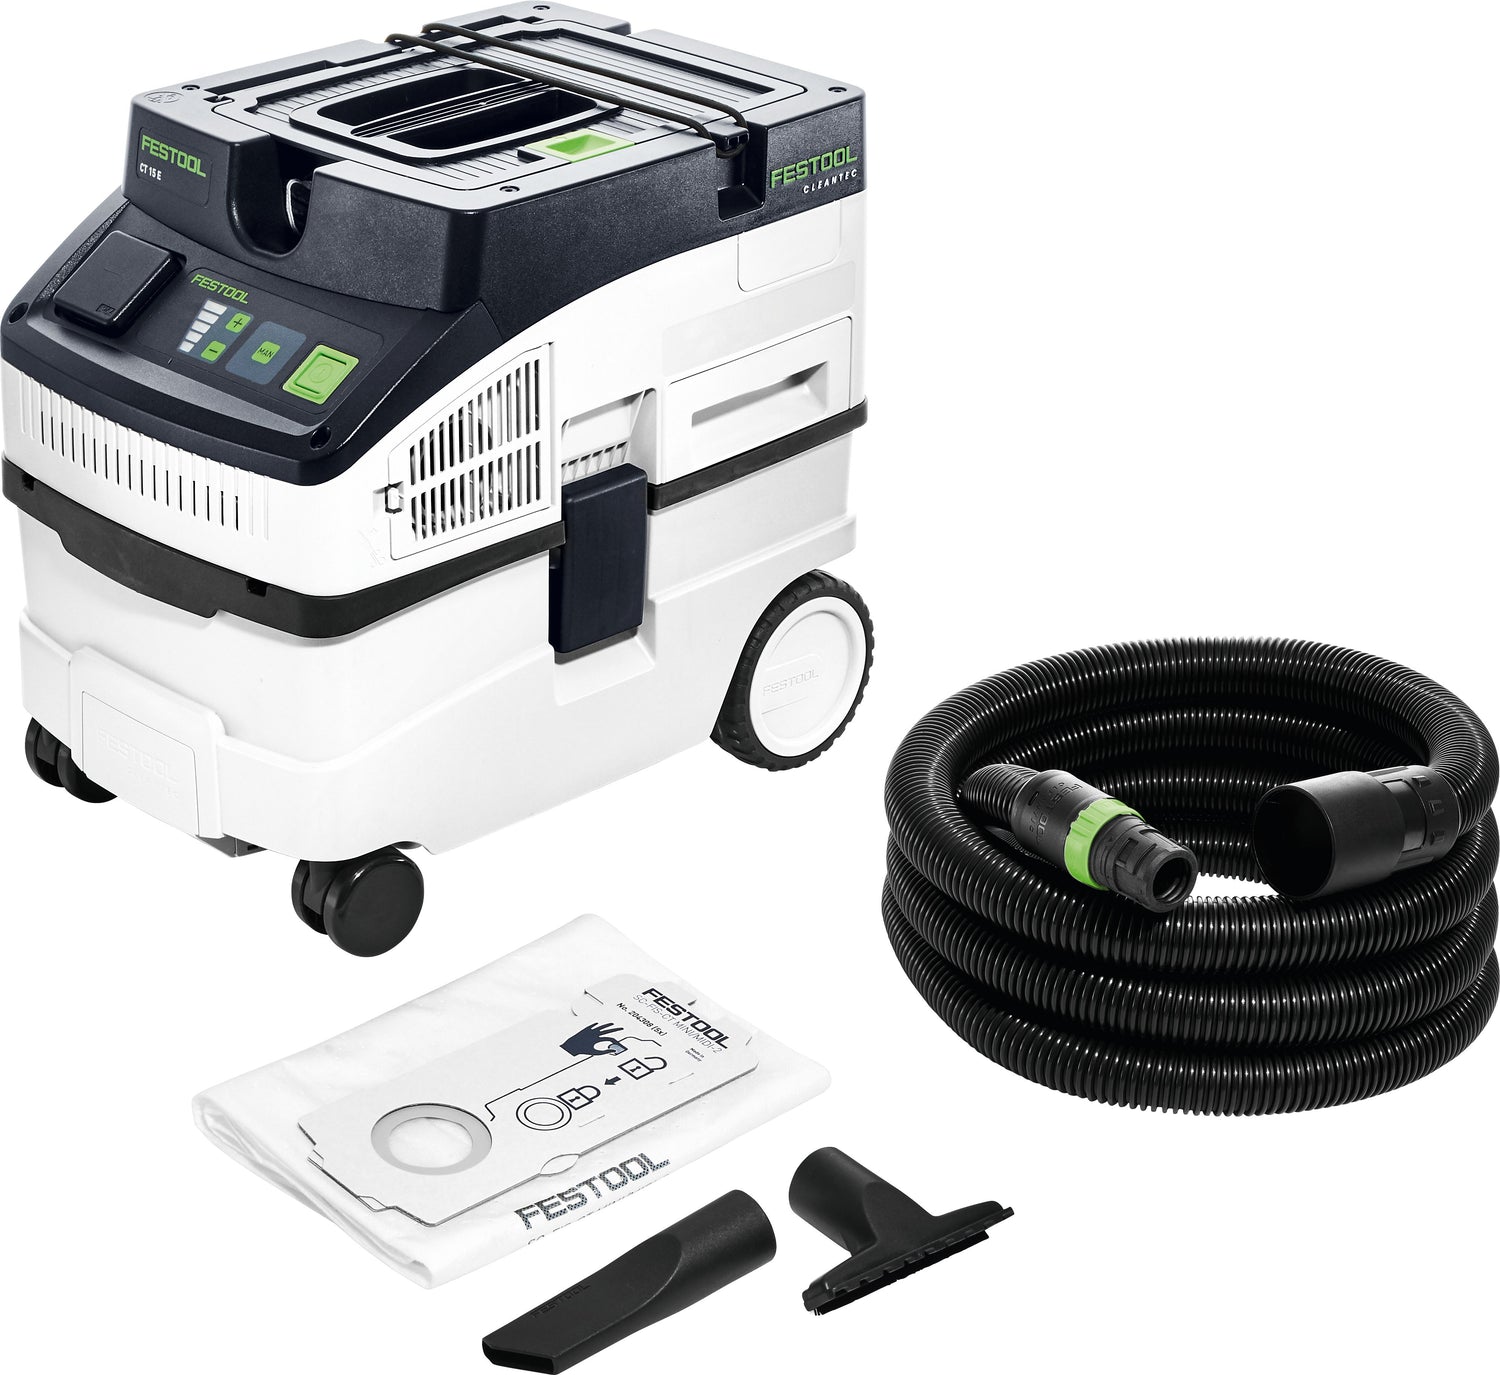 Festool Available Inventory